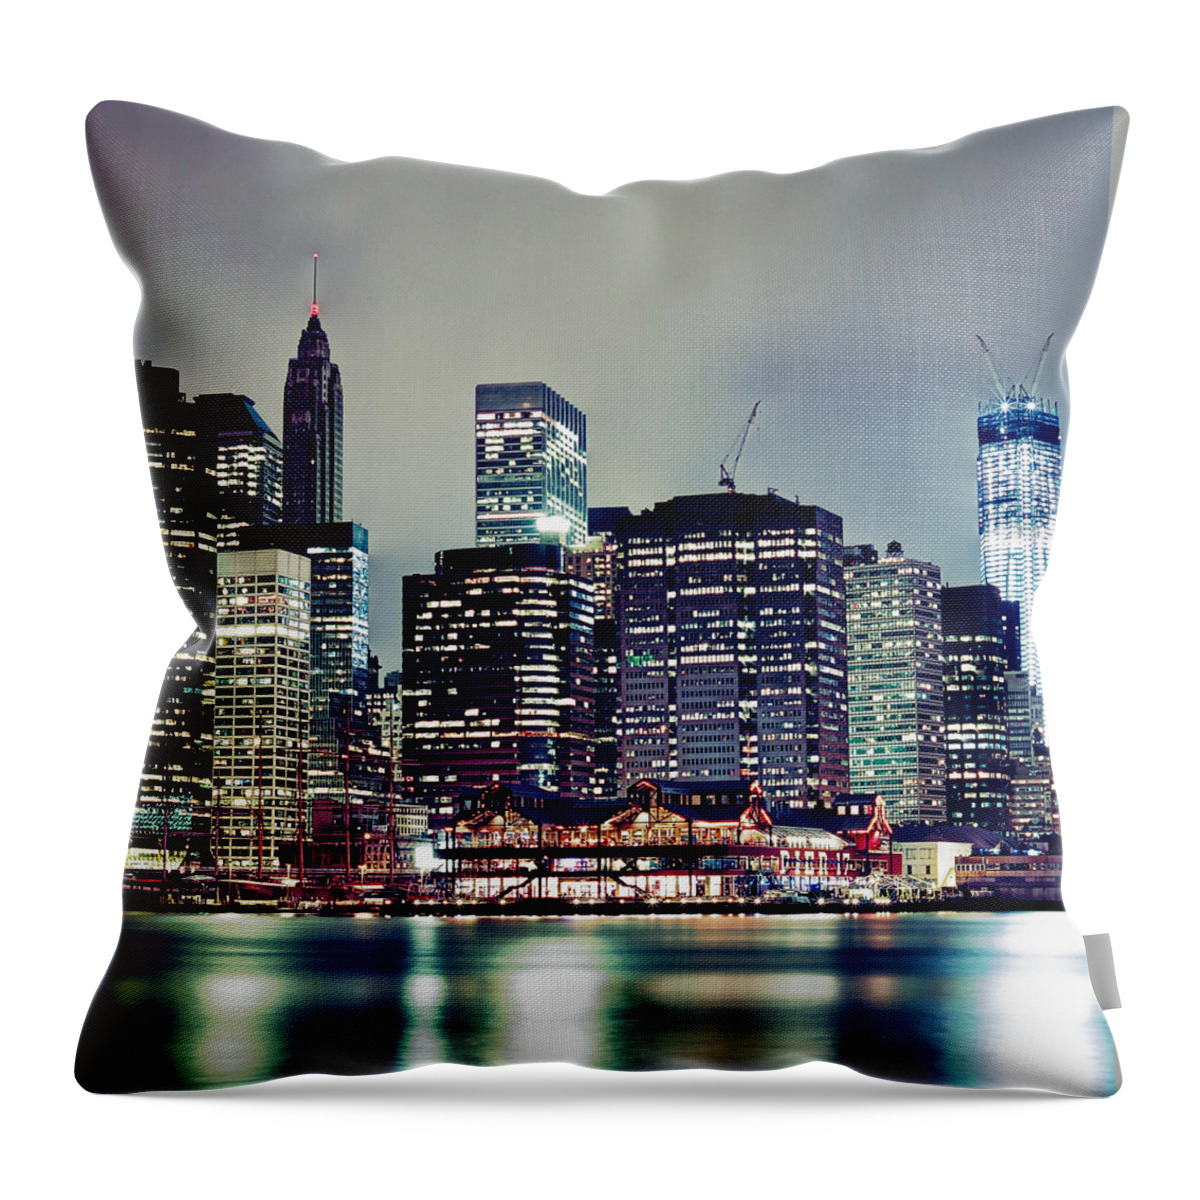 Scenics Throw Pillow featuring the photograph Shining From Port by Photography By Eydie Wong